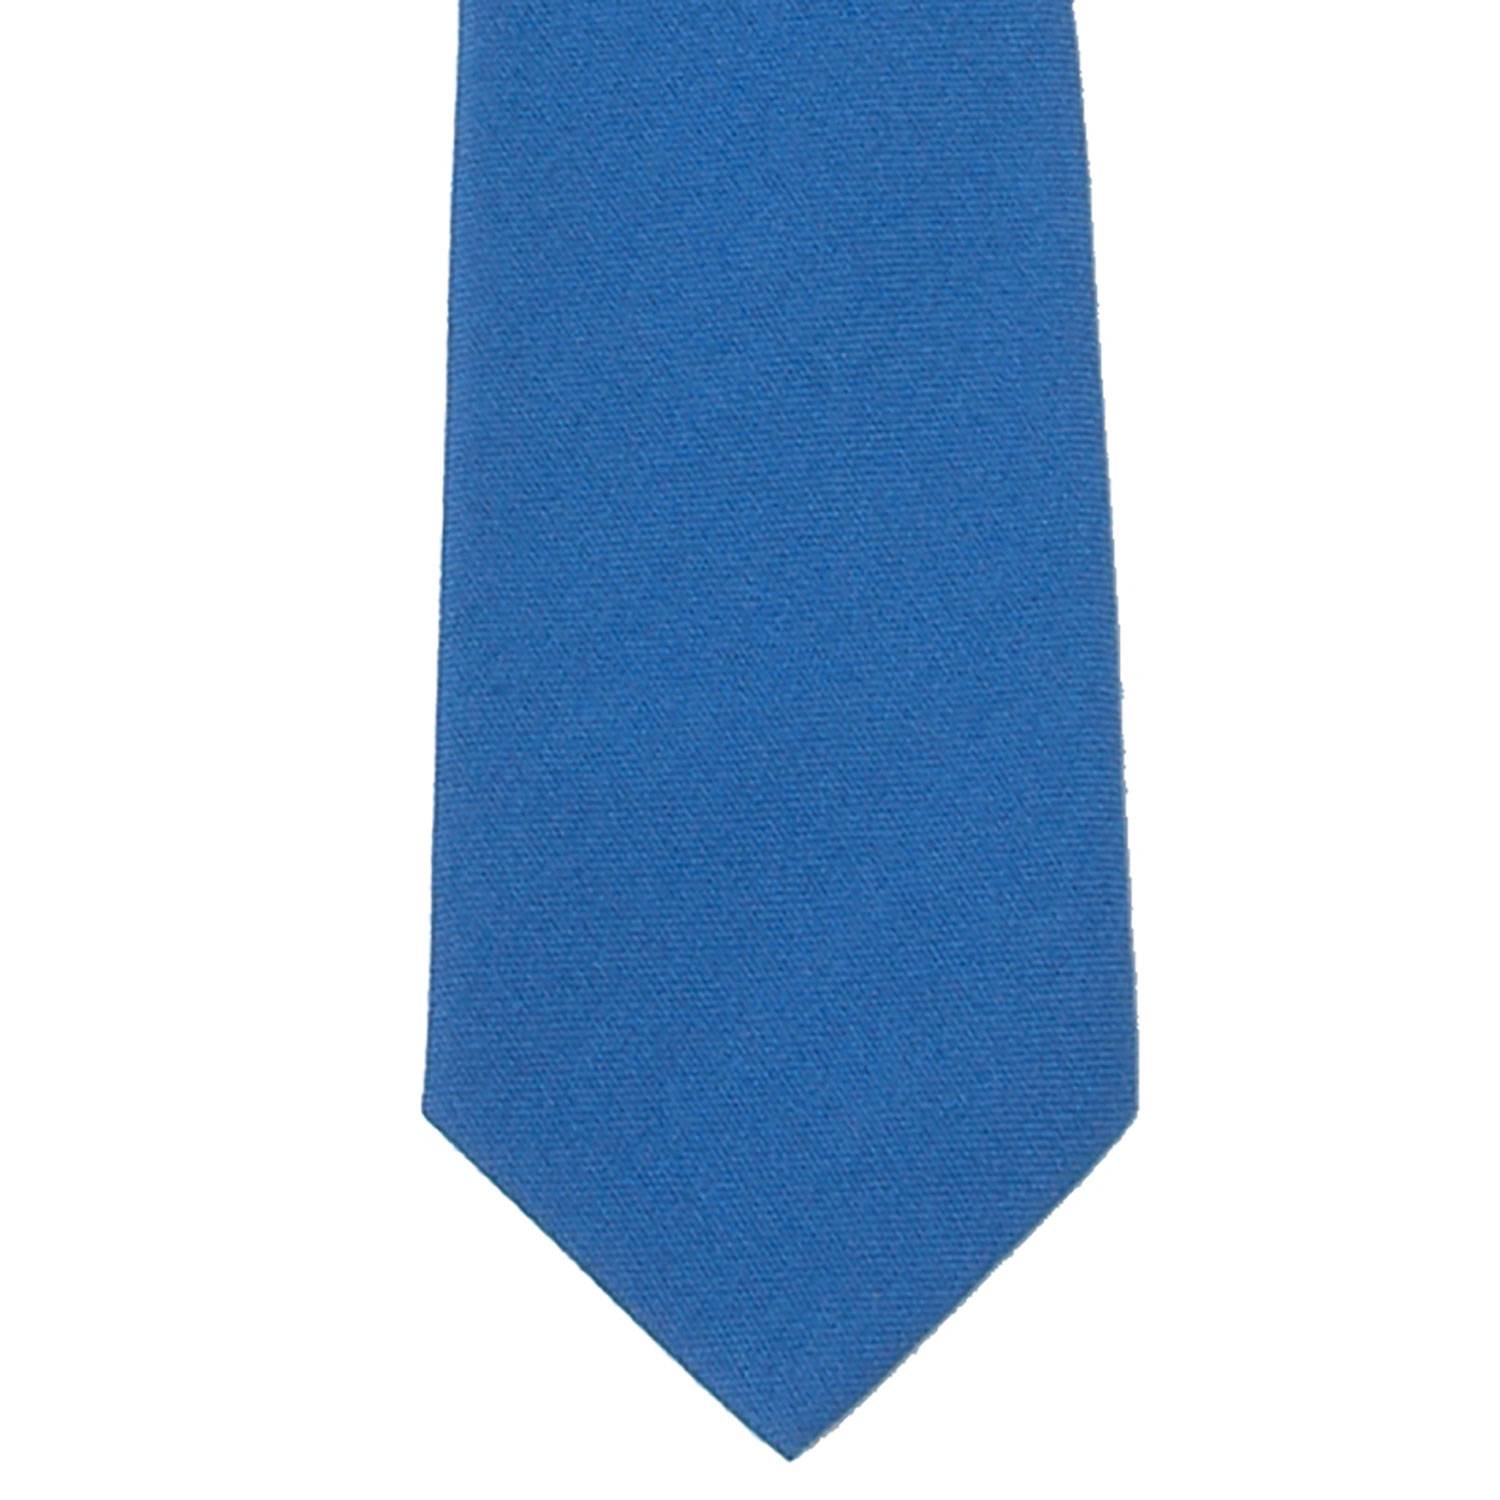 SAMUEL BROOME 3 INCH NECKTIE WITH BUTTONHOLES